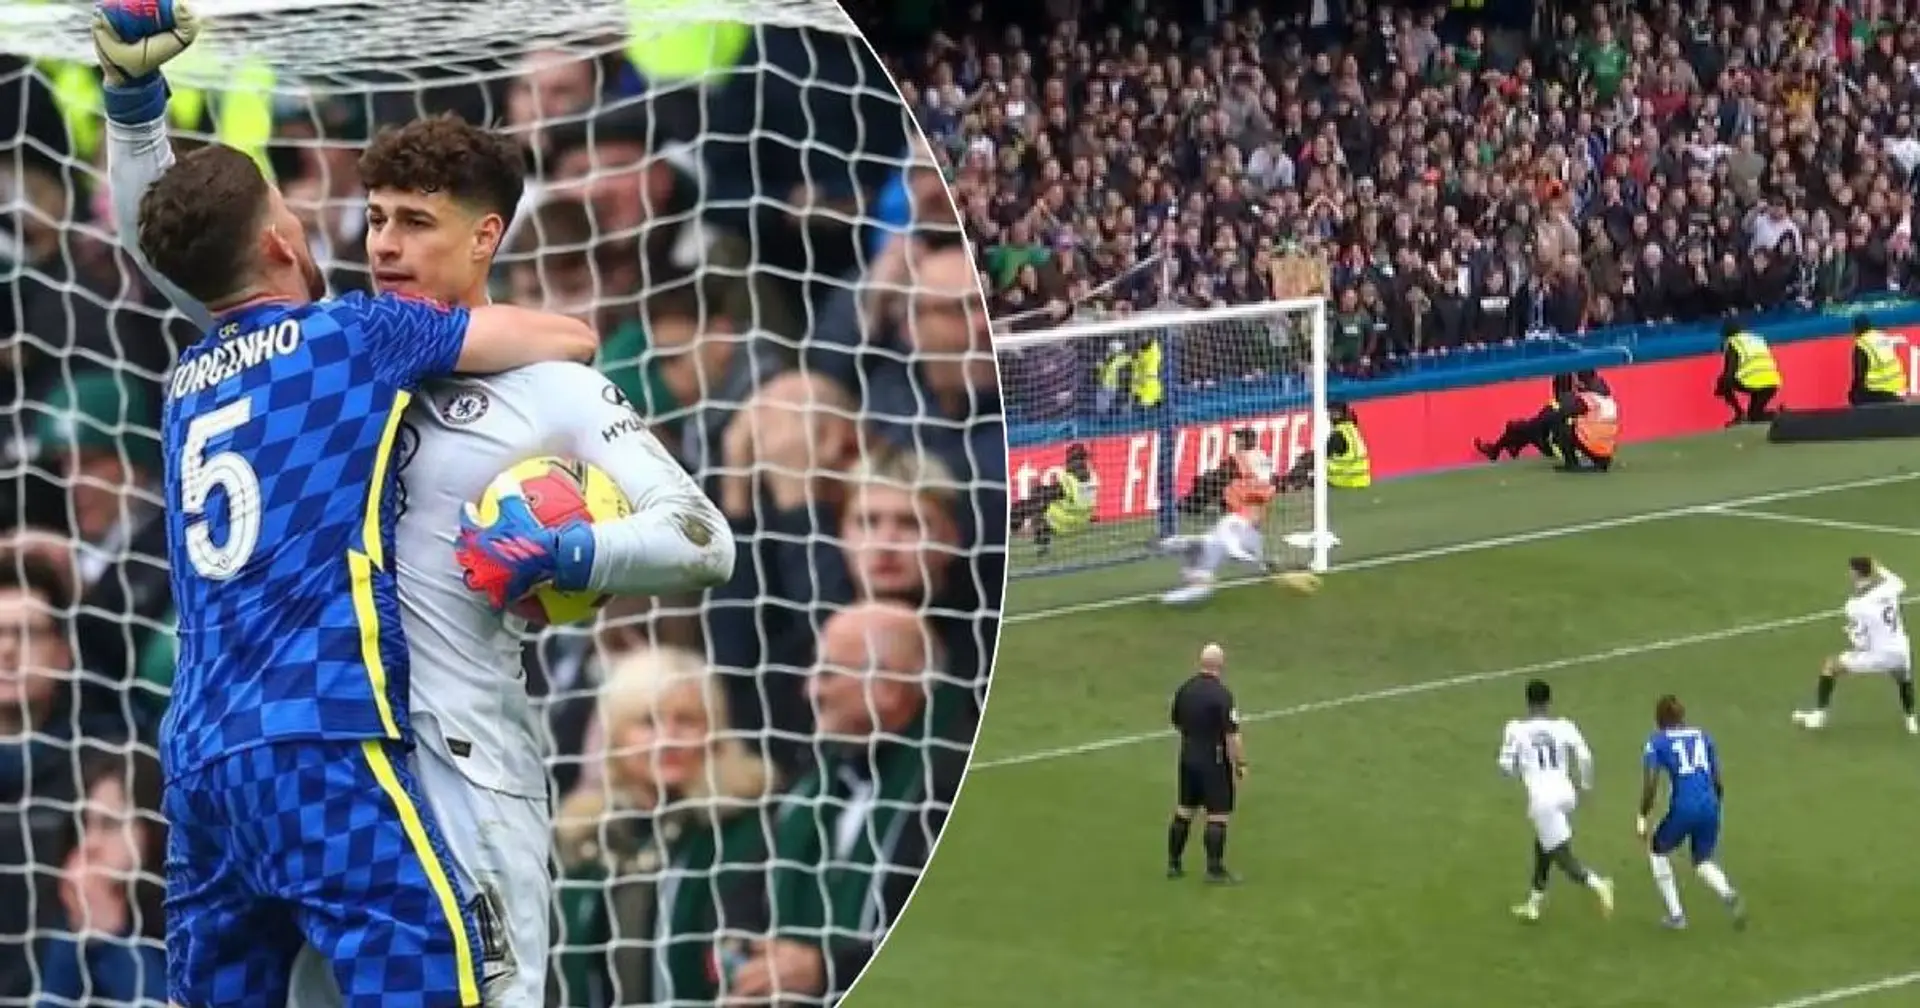 'King of saving penalties': Kepa sends 3-word message to fans after Plymouth win, Blues applaud keeper